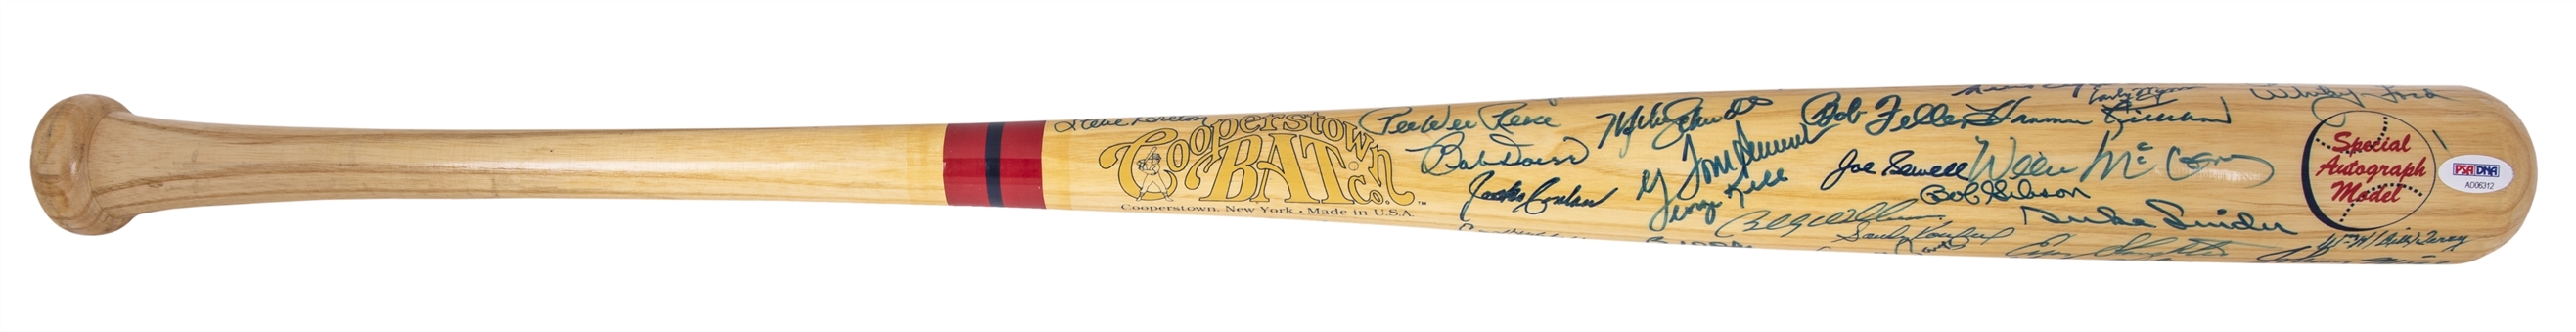 Baseball Hall of Fame Multi-Signed Cooperstown Bat With 60+ Signatures Including Mickey Mantle, Ted Williams, Sandy Koufax, Hank Aaron & More (PSA/DNA & JSA)